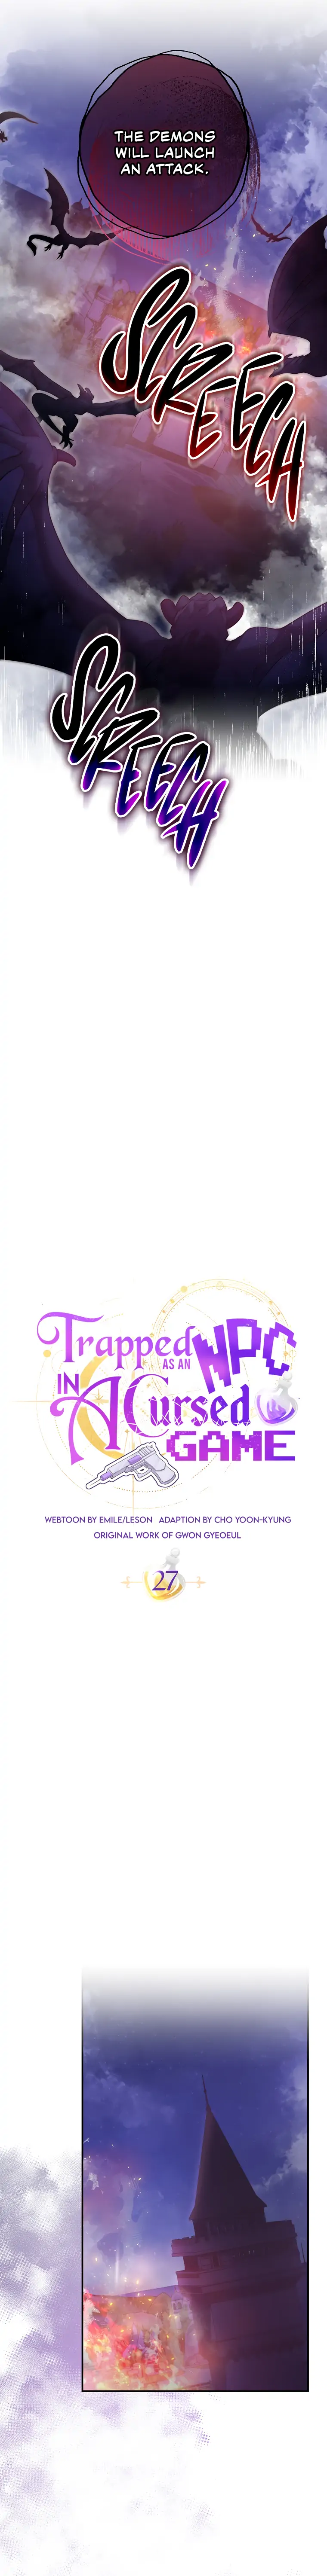 Trapped in a Cursed Game, but now with NPCs chapter 27